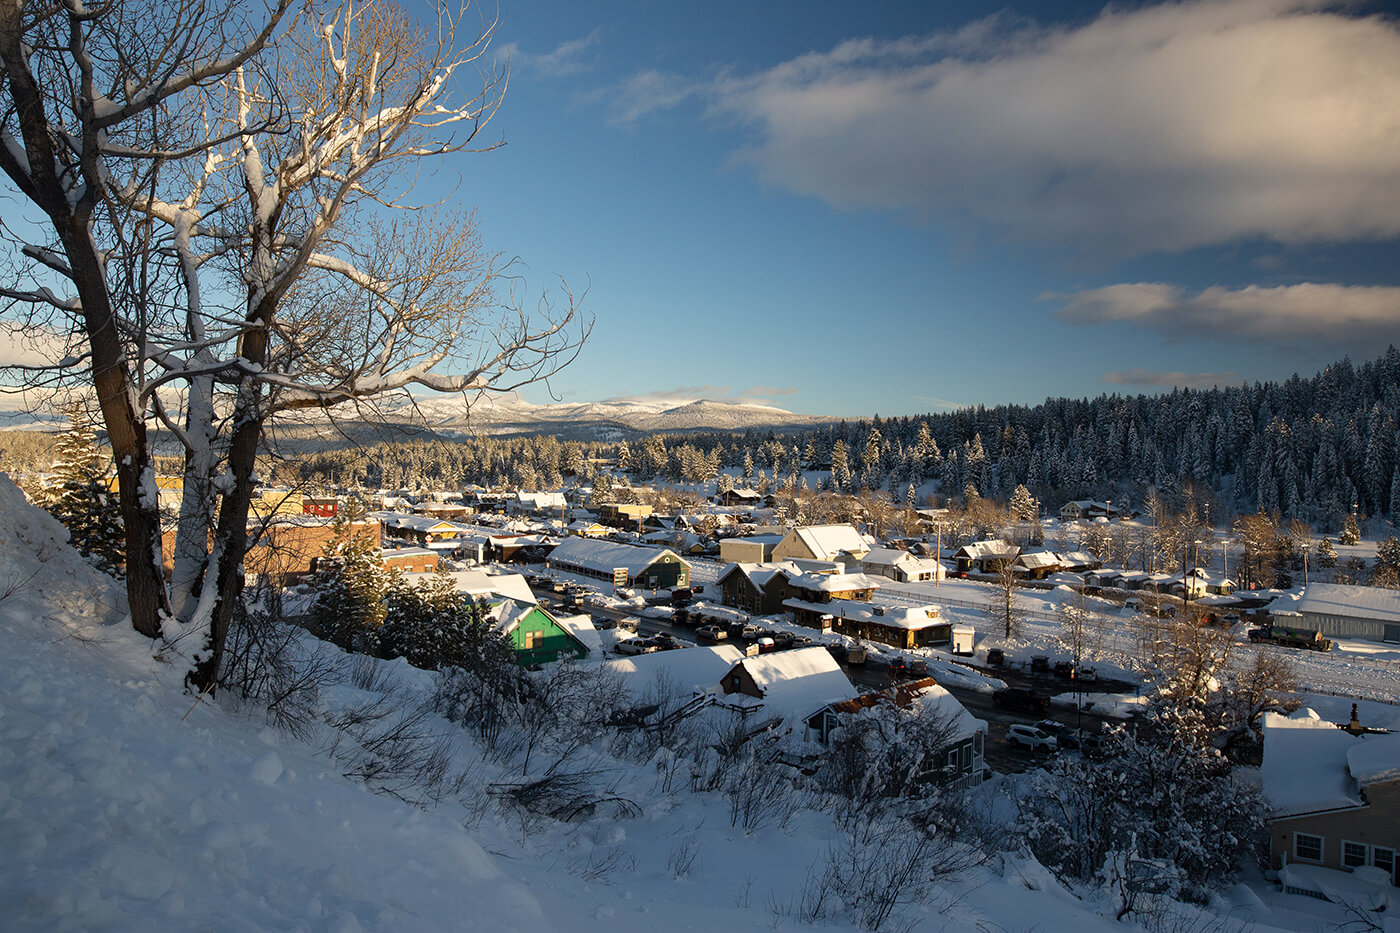 View of Truckee in the snow